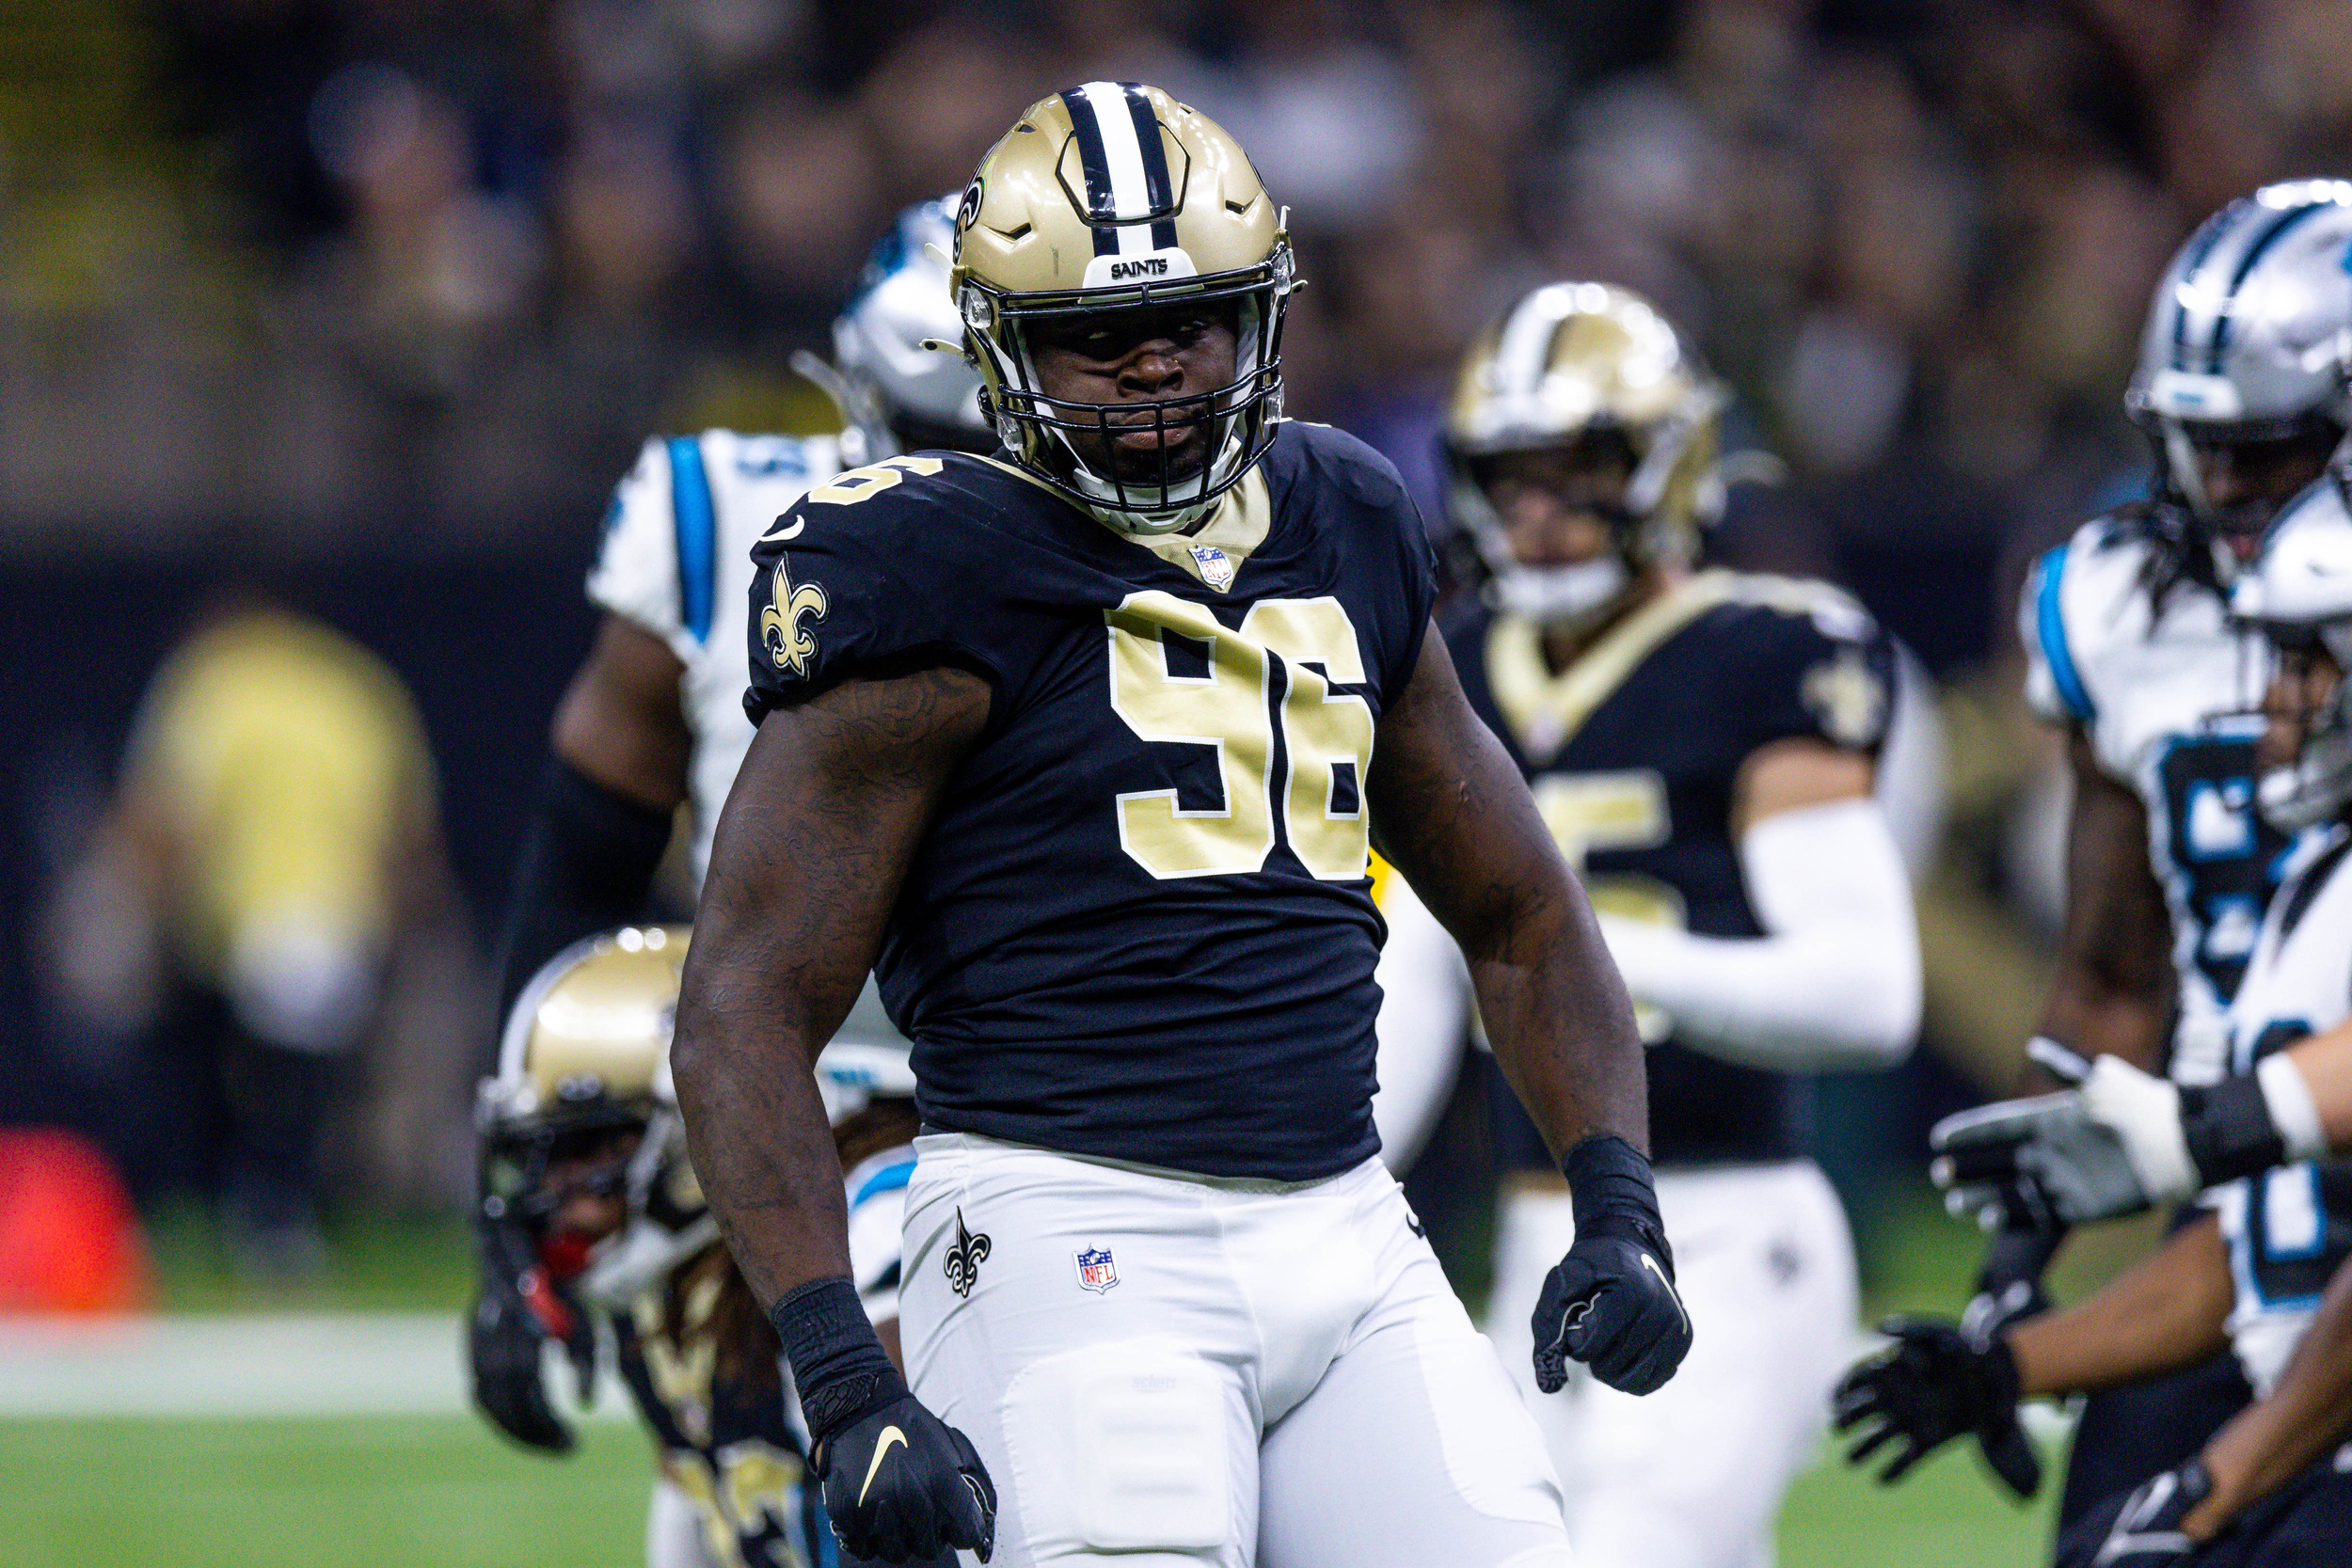 saints make series of contract restructures ahead of free agency